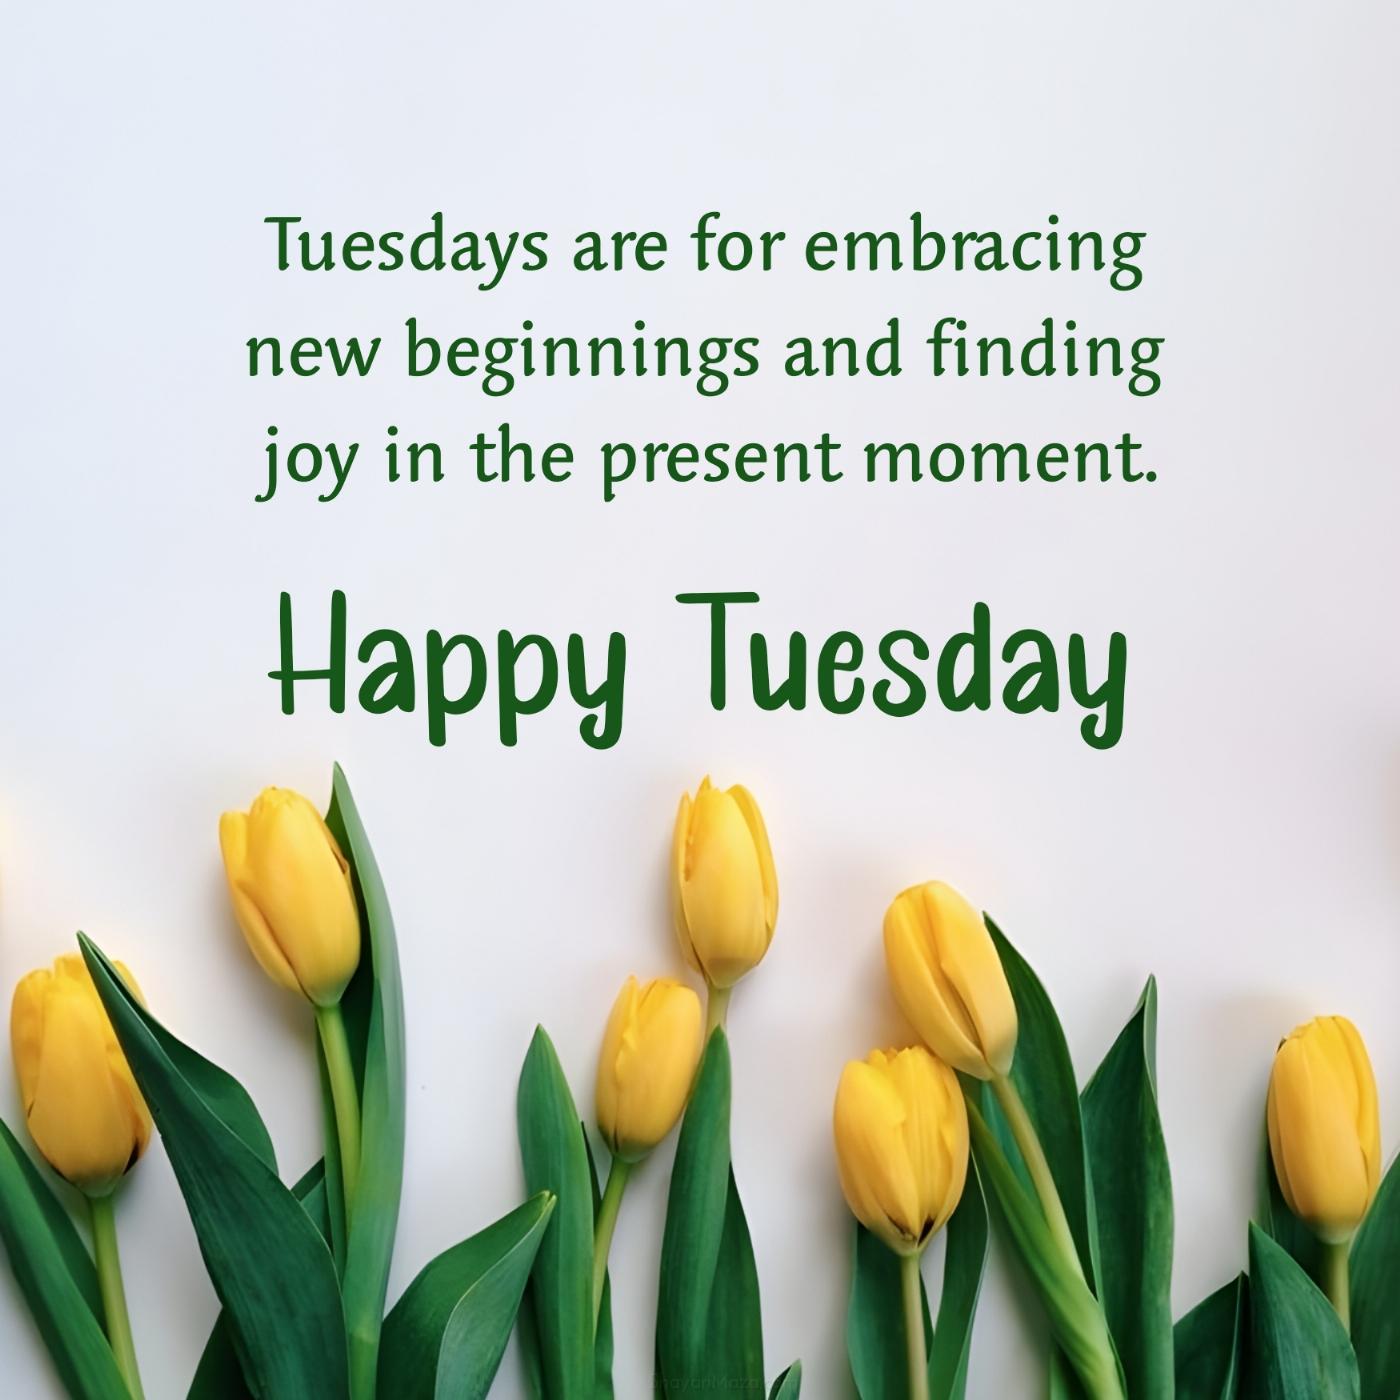 Tuesdays are for embracing new beginnings and finding joy